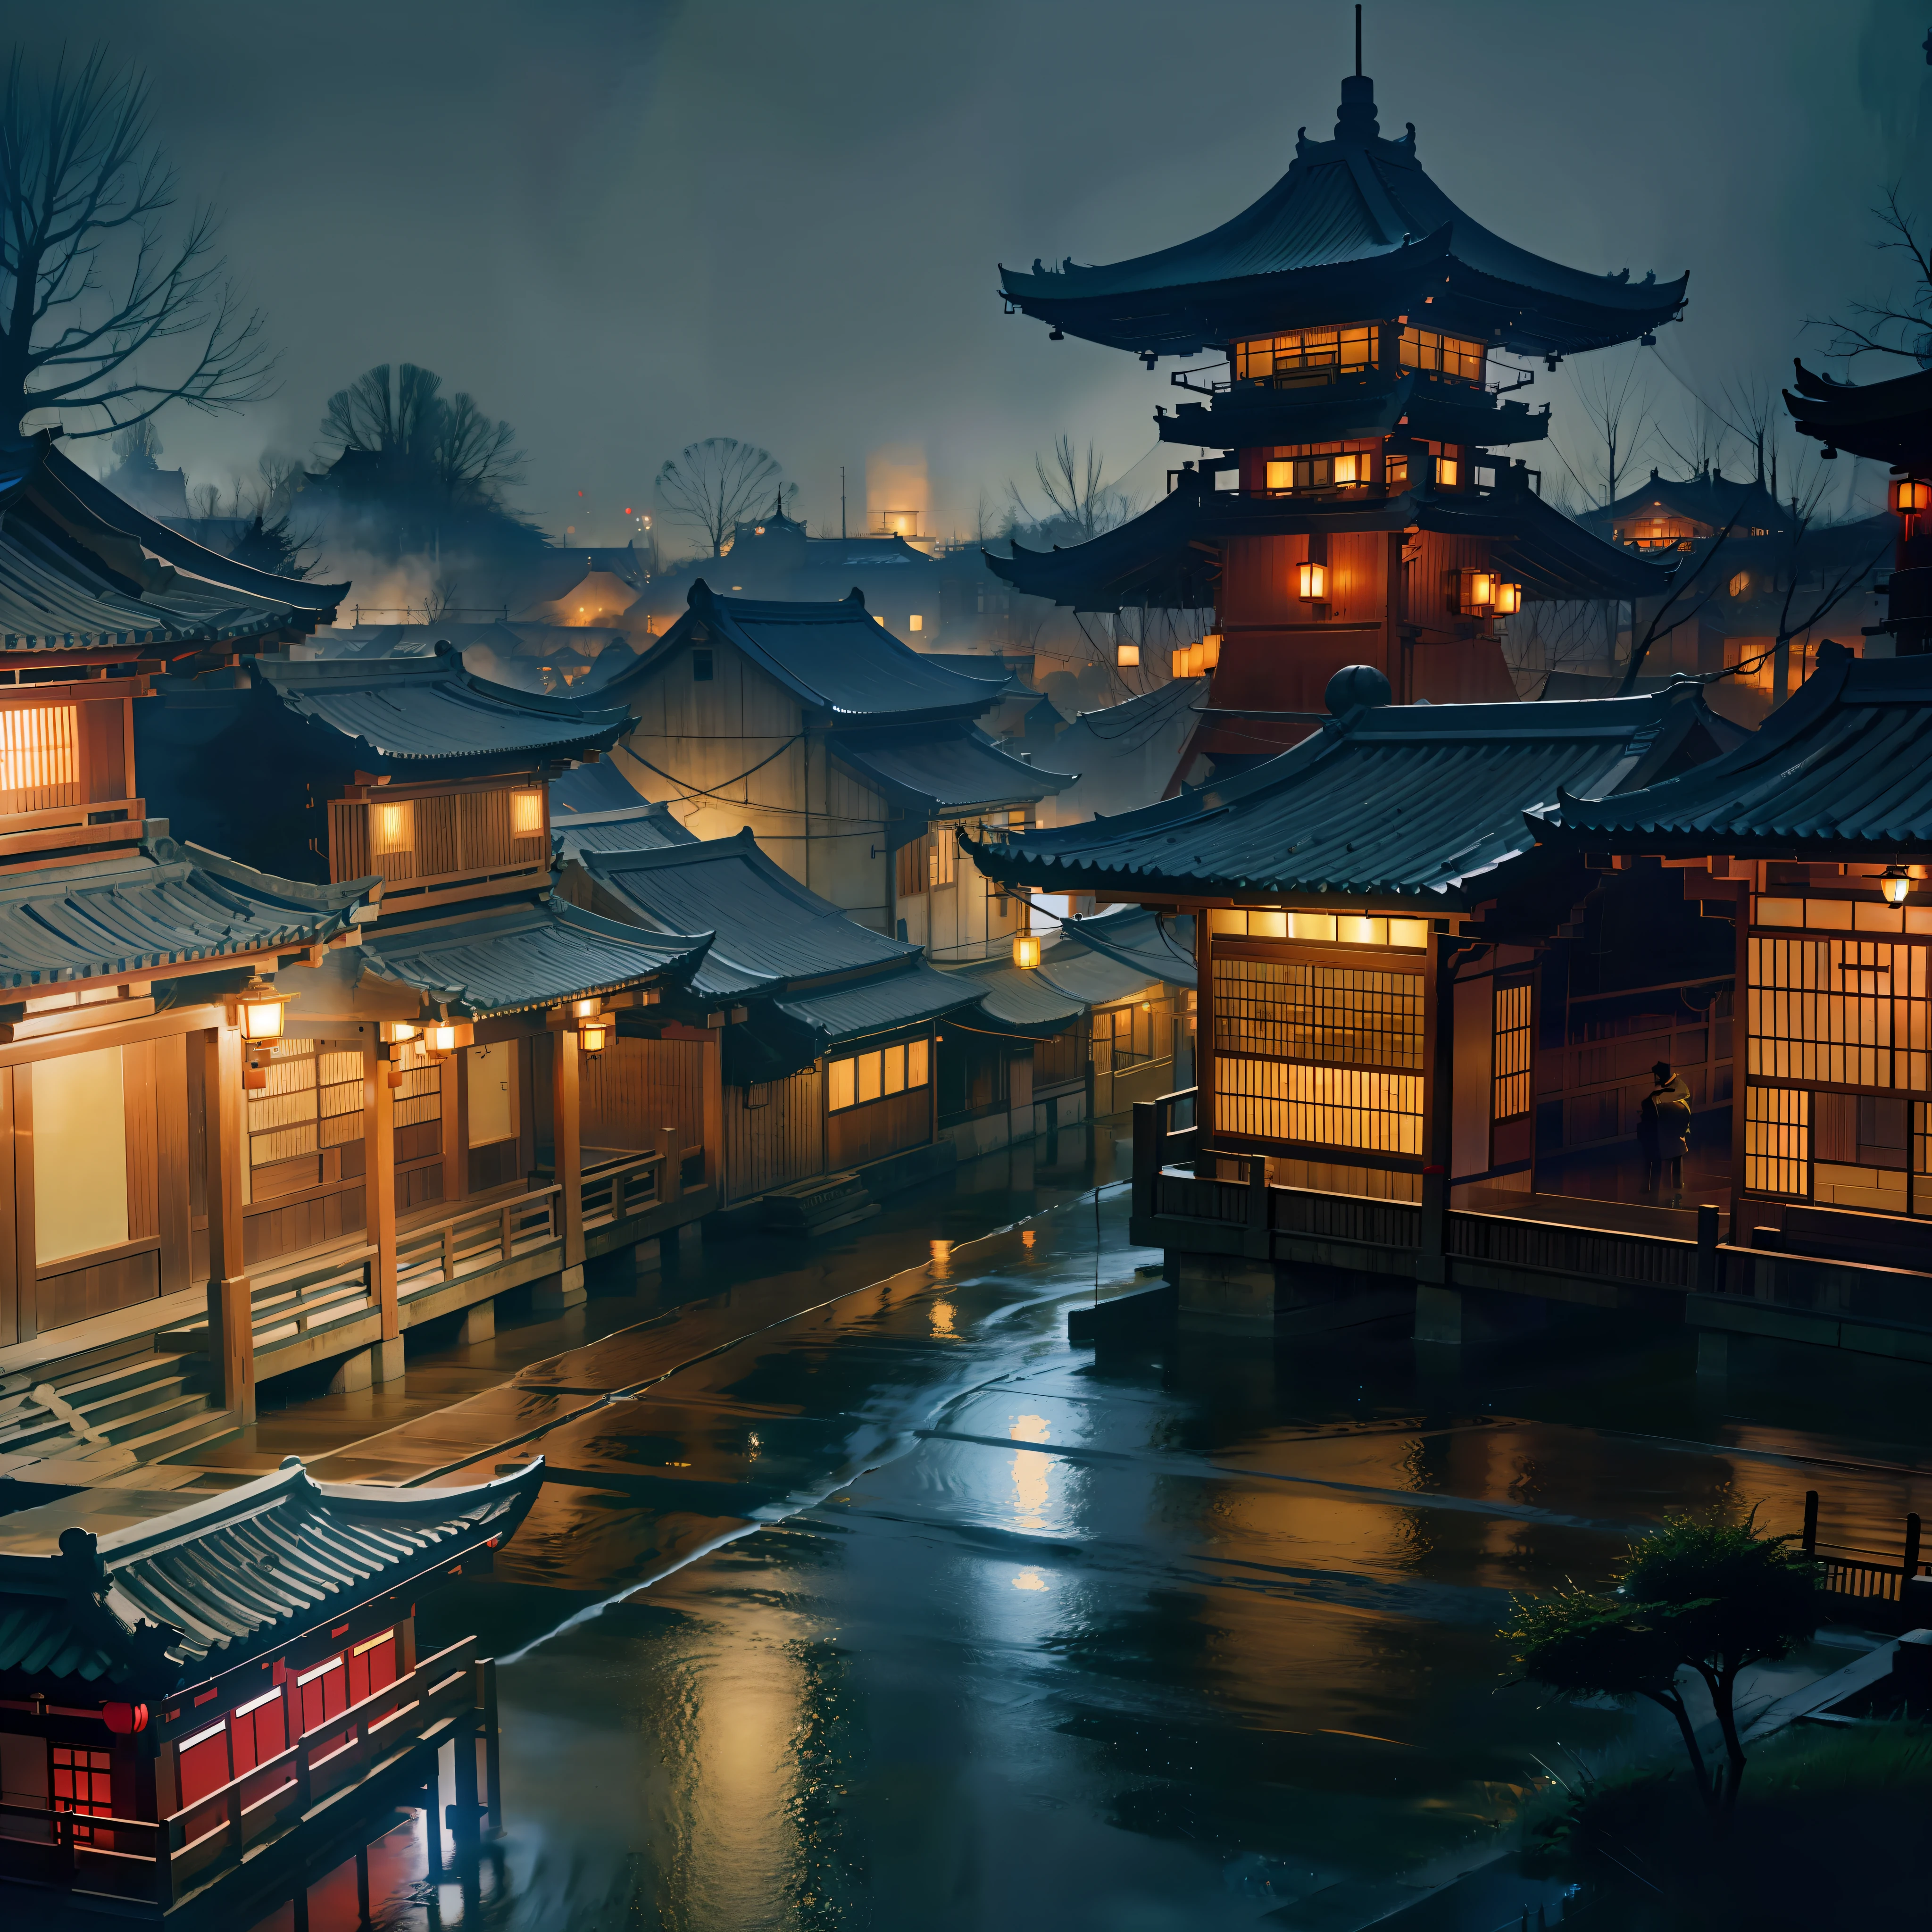 arafed view of a village with a lot of lights on the buildings, dreamy chinese town, chinese village, amazing wallpaper, japanese town, japanese village, hyper realistic photo of a town, old asian village, japanese city, by Raymond Han, rainy evening, cyberpunk chinese ancient castle, beautifully lit buildings, at evening during rain, beautiful and aesthetic, photography, cinematic, 8k, high detailed ((Heavy rain)))